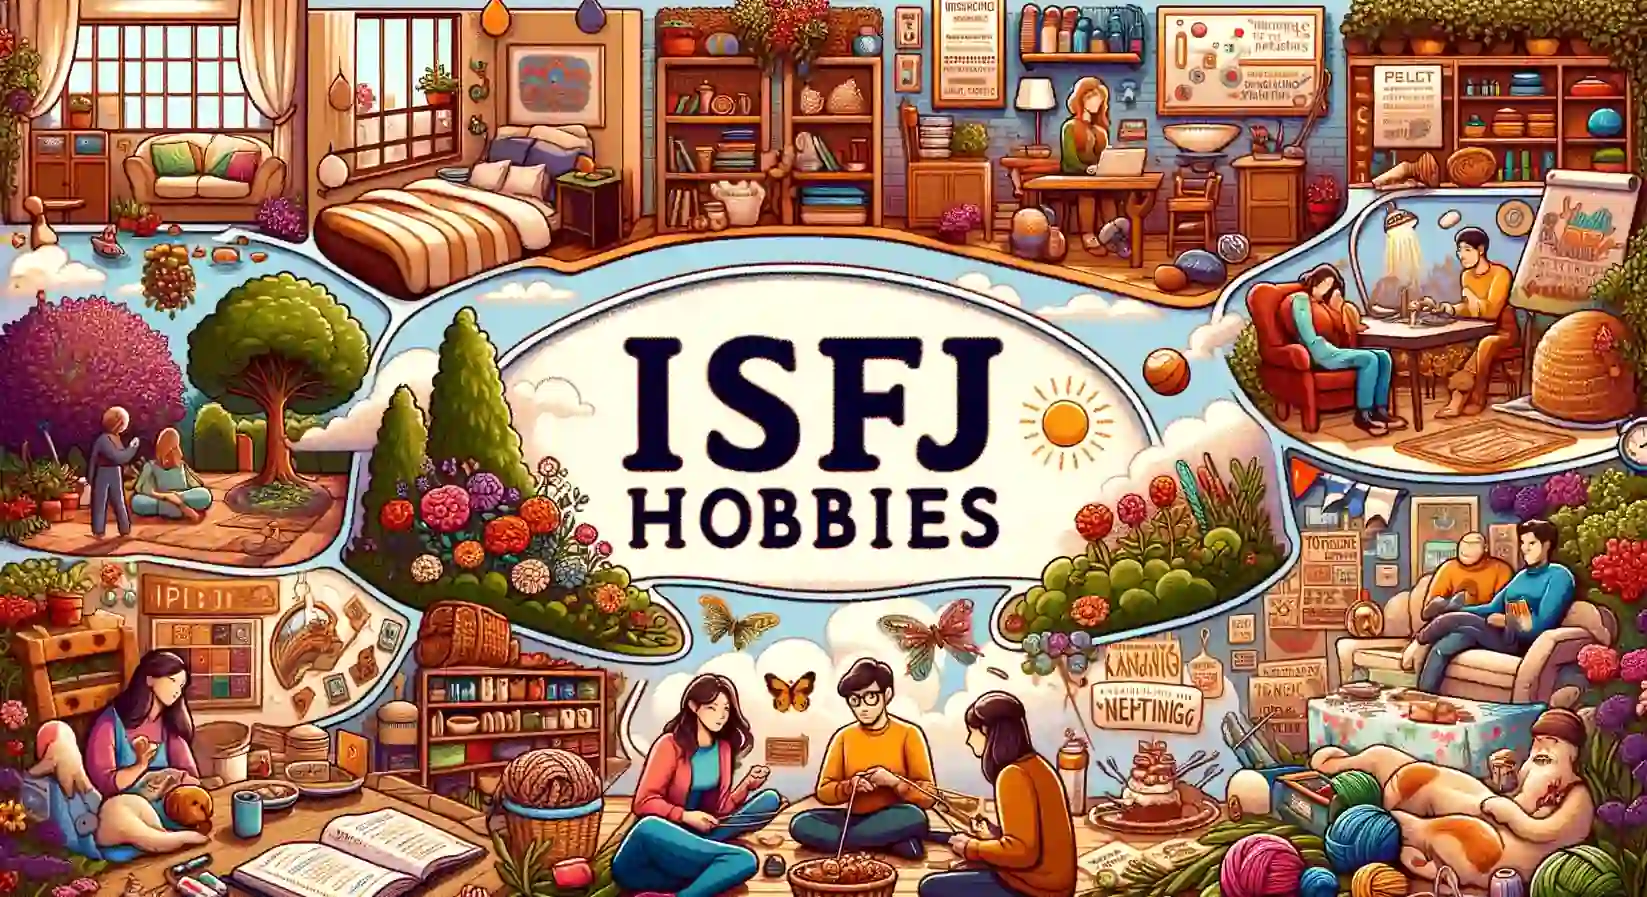 Ultimate ISFJ Hobbies That Don’t Include Folding Laundry